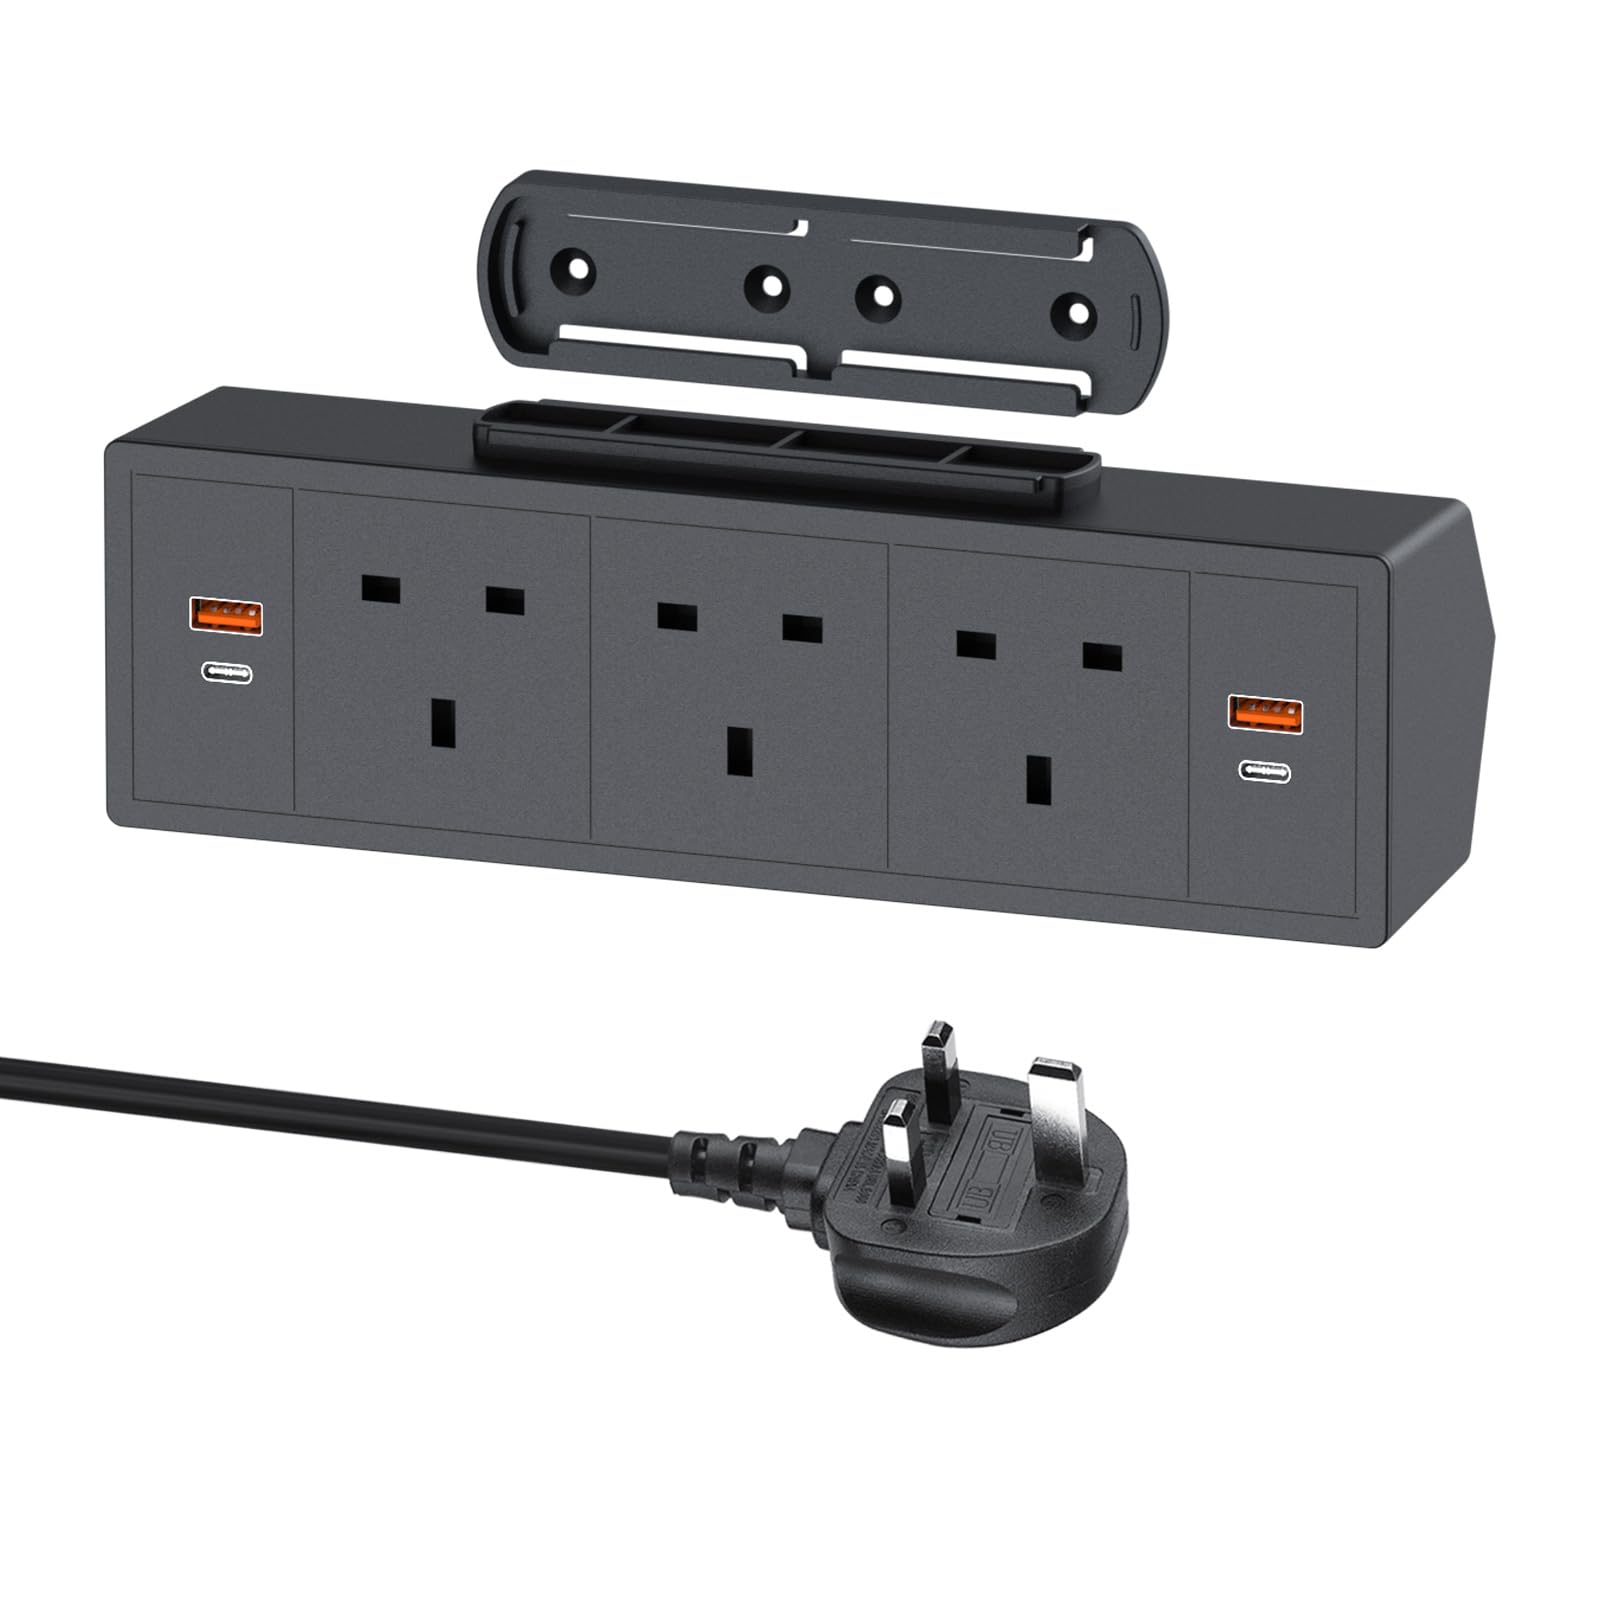 Power strip with unplugged accessories